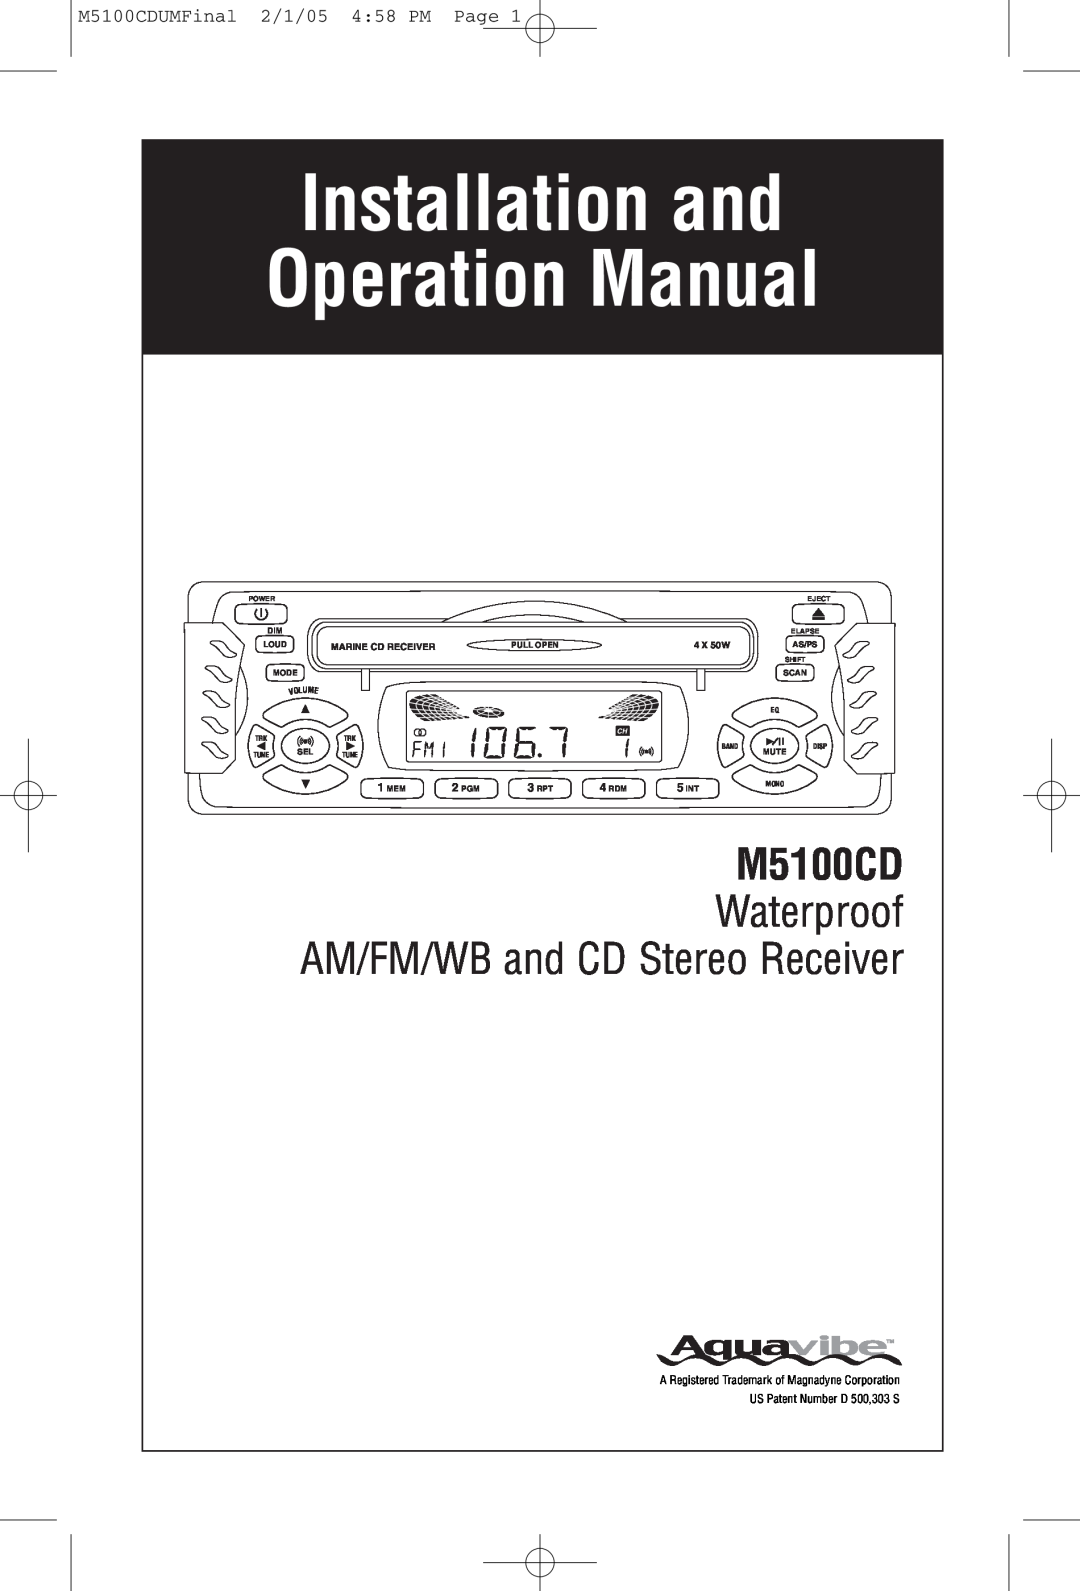 Magnadyne operation manual Waterproof, AM/FM/WB and CD Stereo Receiver, M5100CDUMFinal 2/1/05 4 58 PM Page 